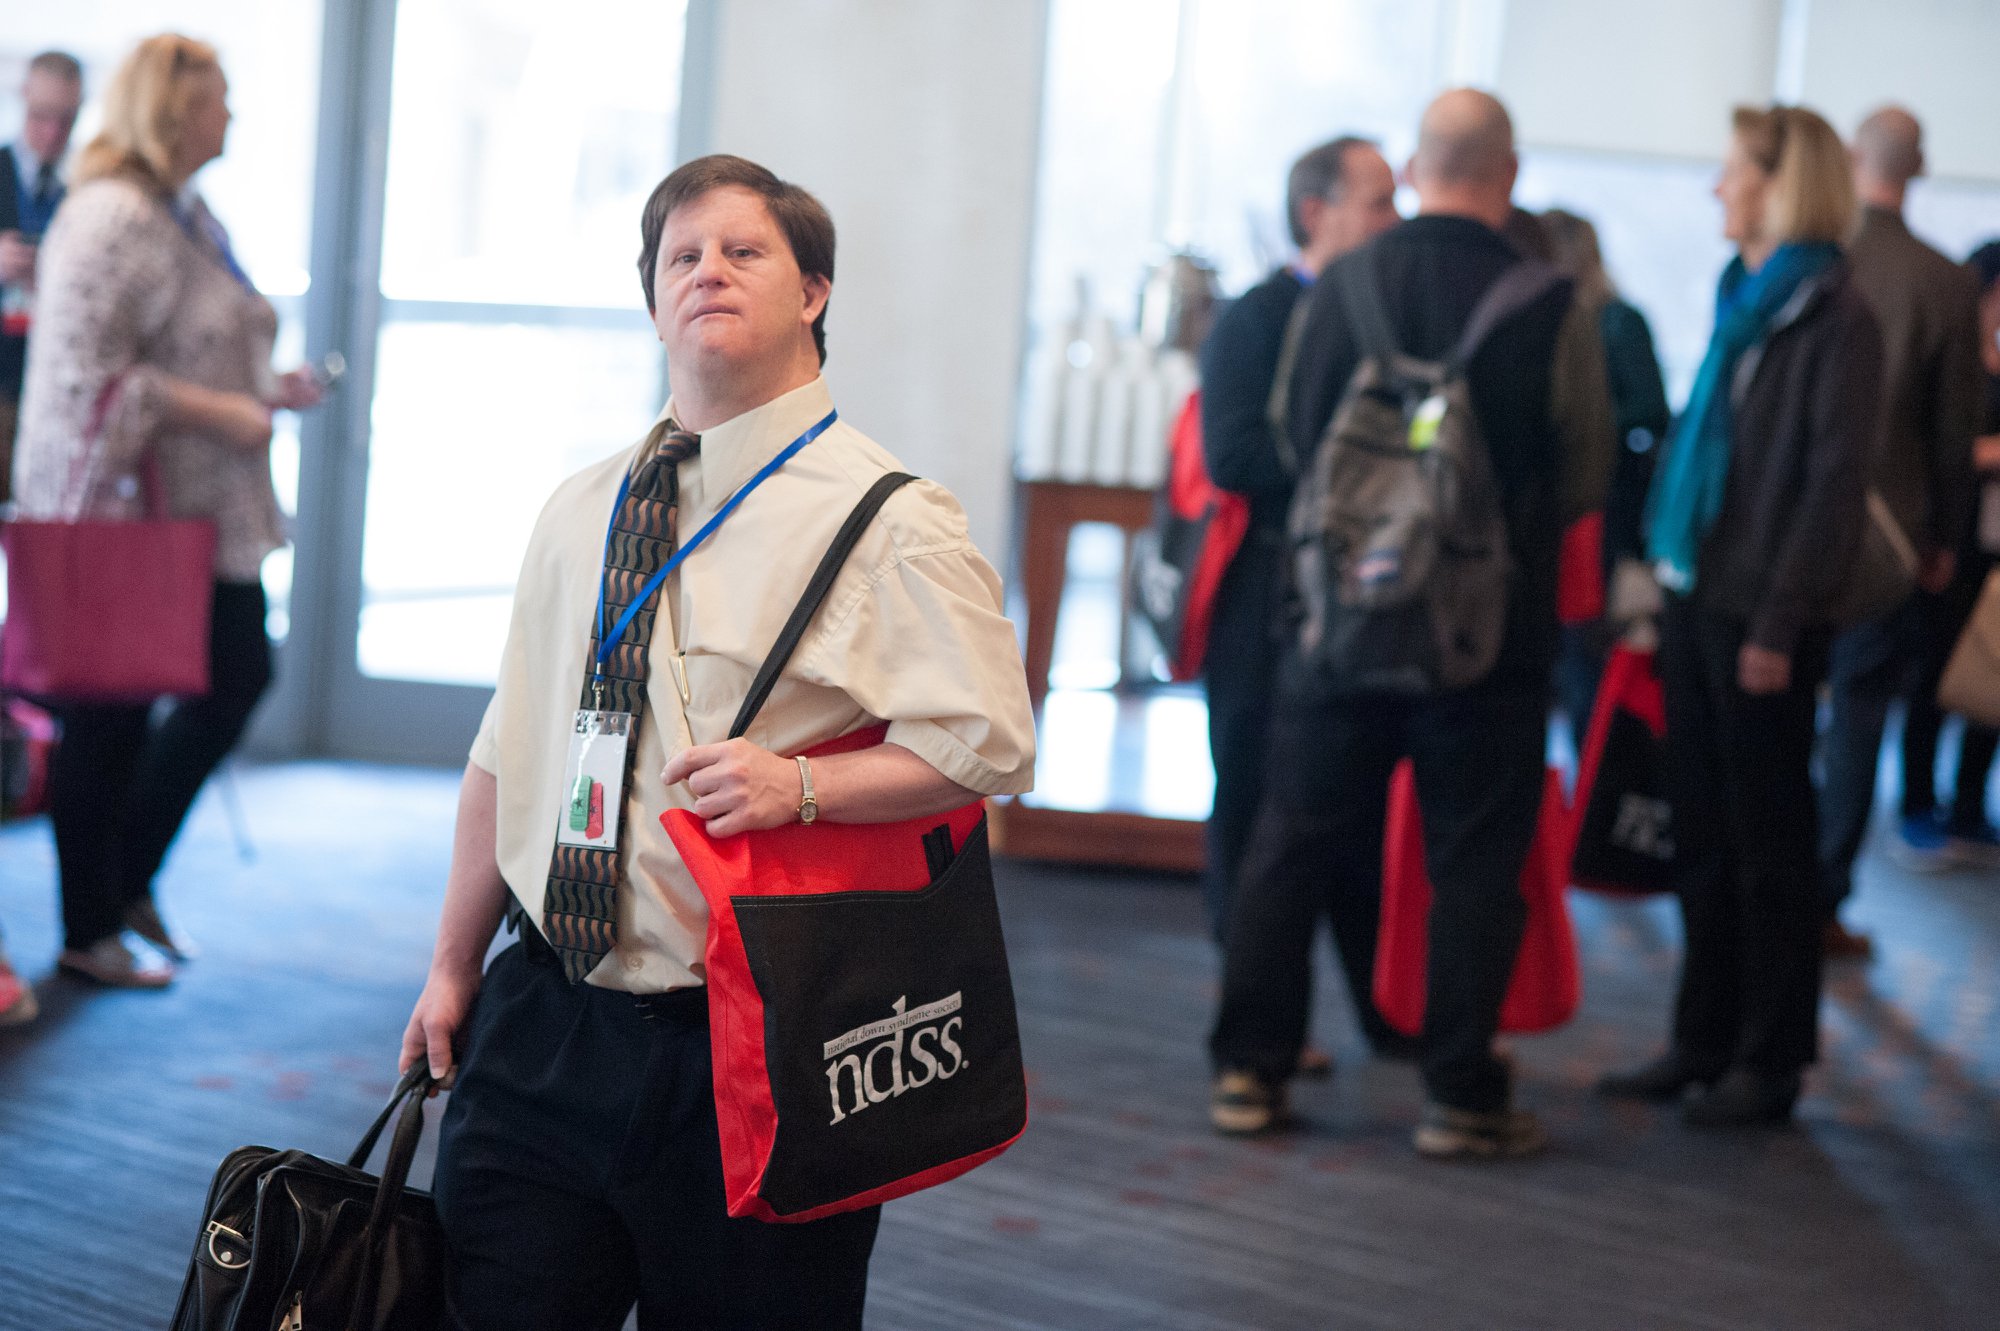 adult summit conference photo of man holding bag at conference